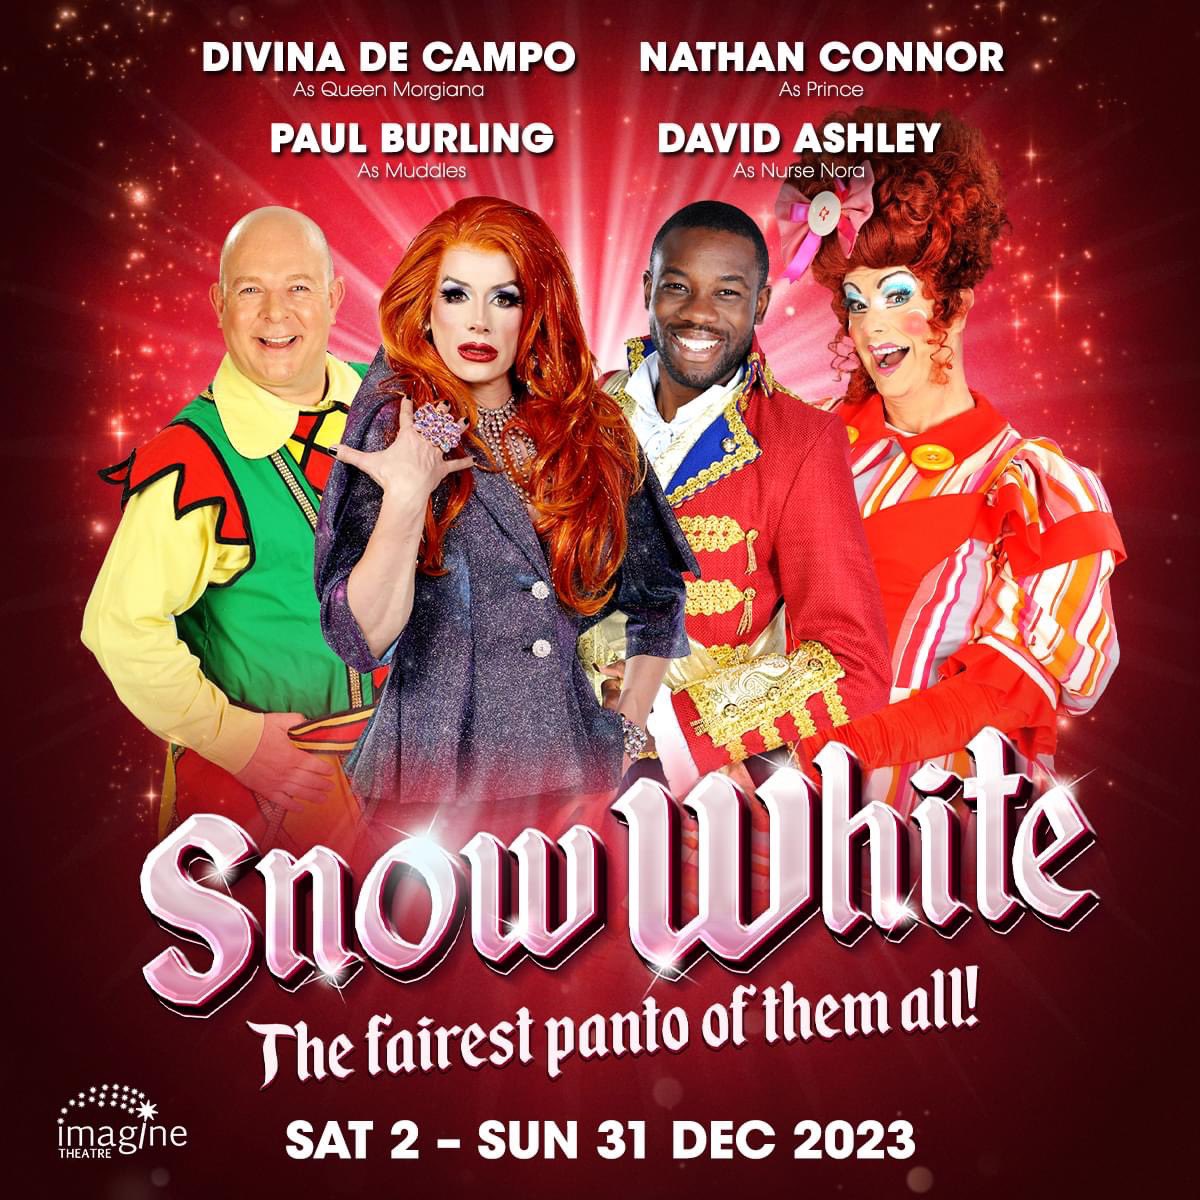 First day off today since we opened at the @WyvernTheatre great #panto with the most wonderful cast & crew, only down point is I’m a bit poorly with a poxy cold 🤧 but #theshowmustgoon @imaginetheatre